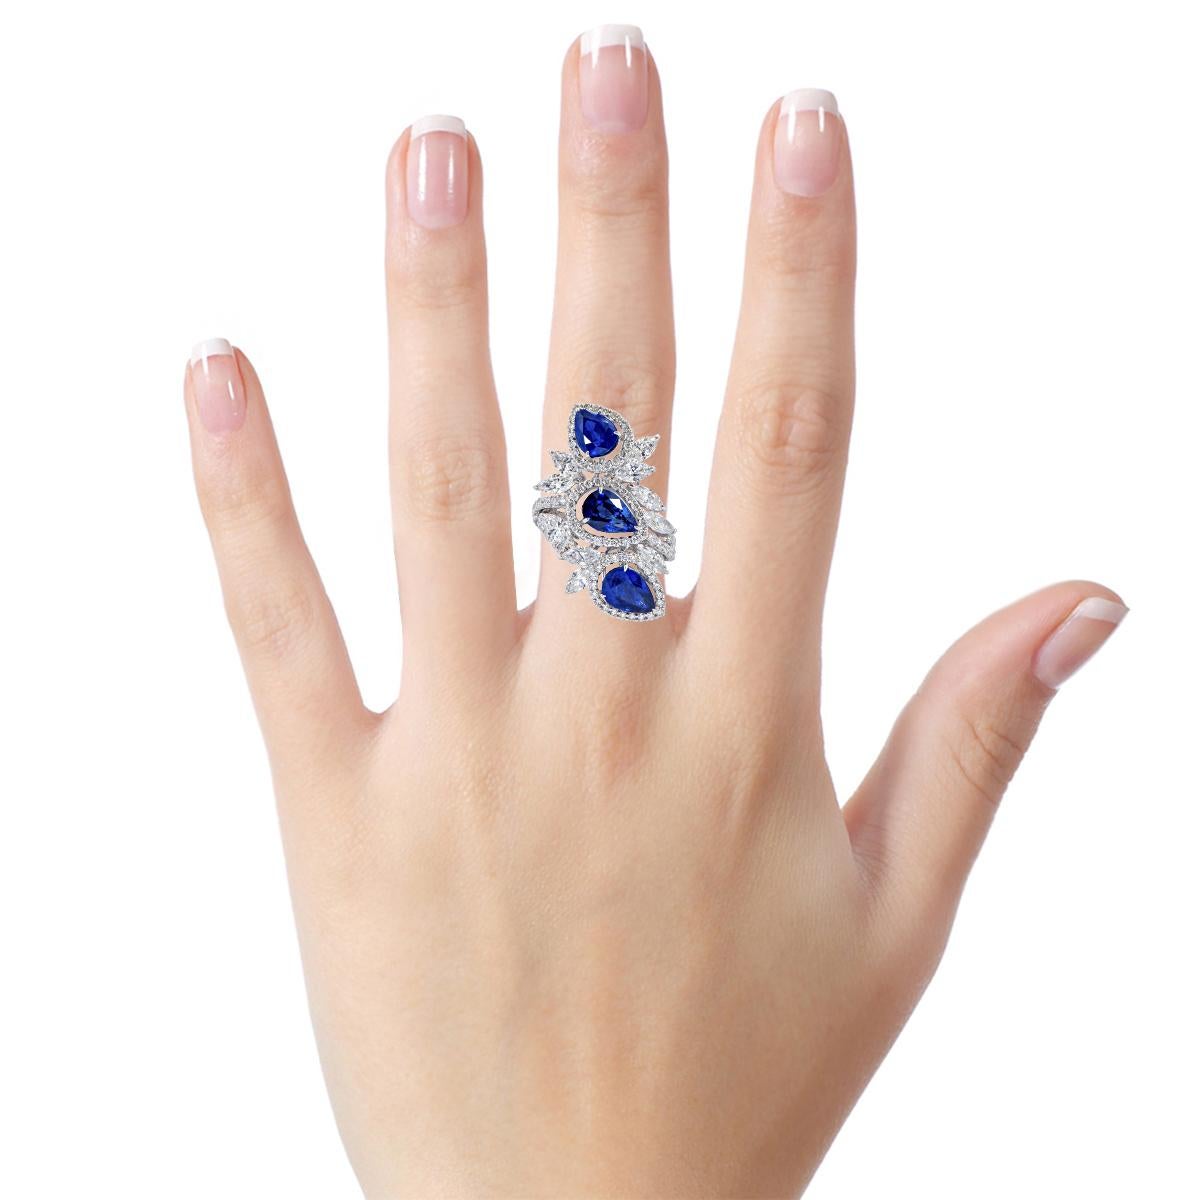 18 Karat White Gold 5.43 Carat Sapphire and Diamond Cocktail Ring For Sale 1